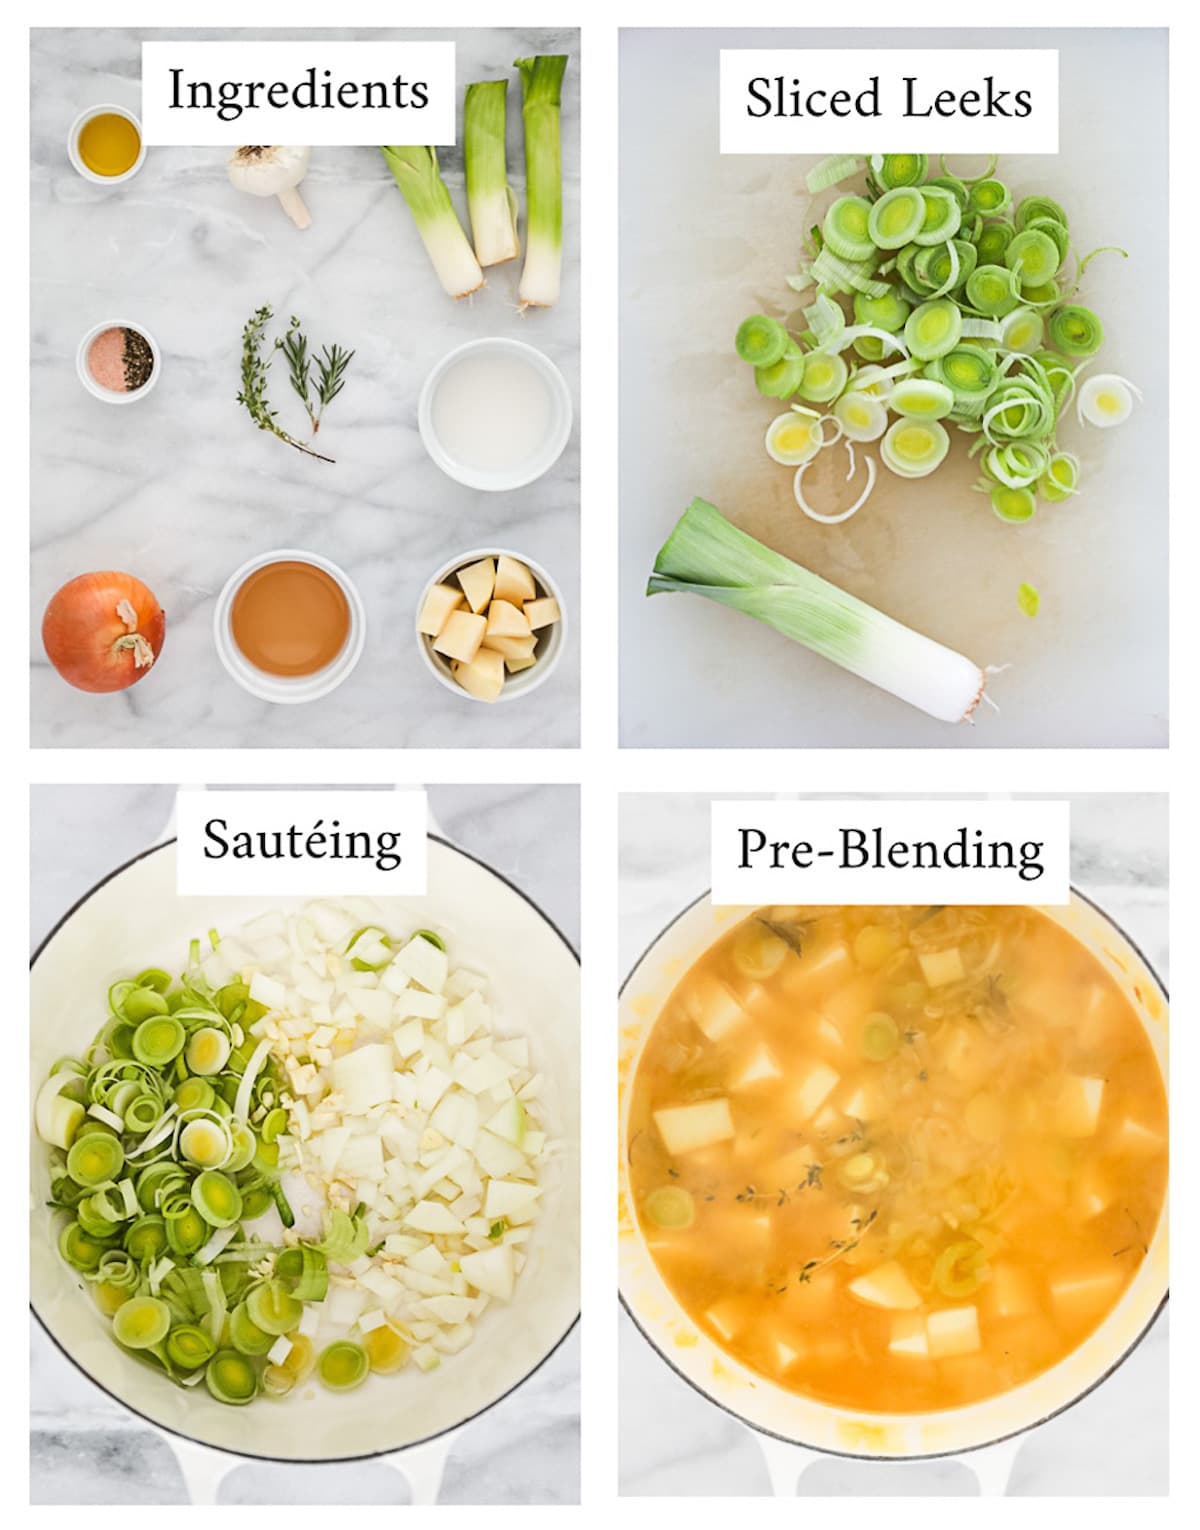 4 pictures including: soup ingredients, sliced leeks, sauteing leeks and onions, and cooked soup before blending.